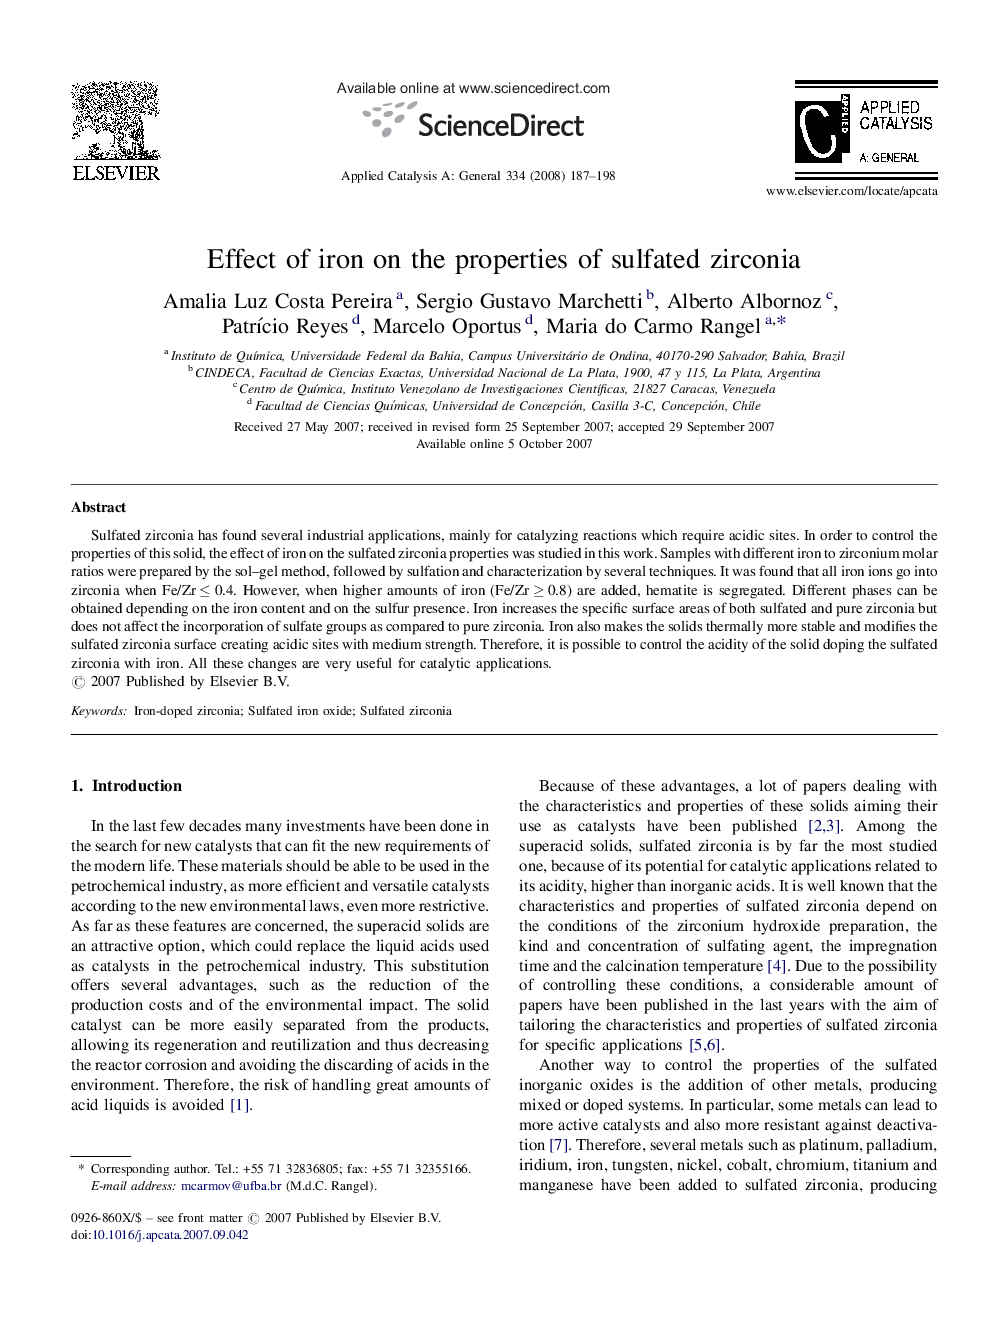 Effect of iron on the properties of sulfated zirconia